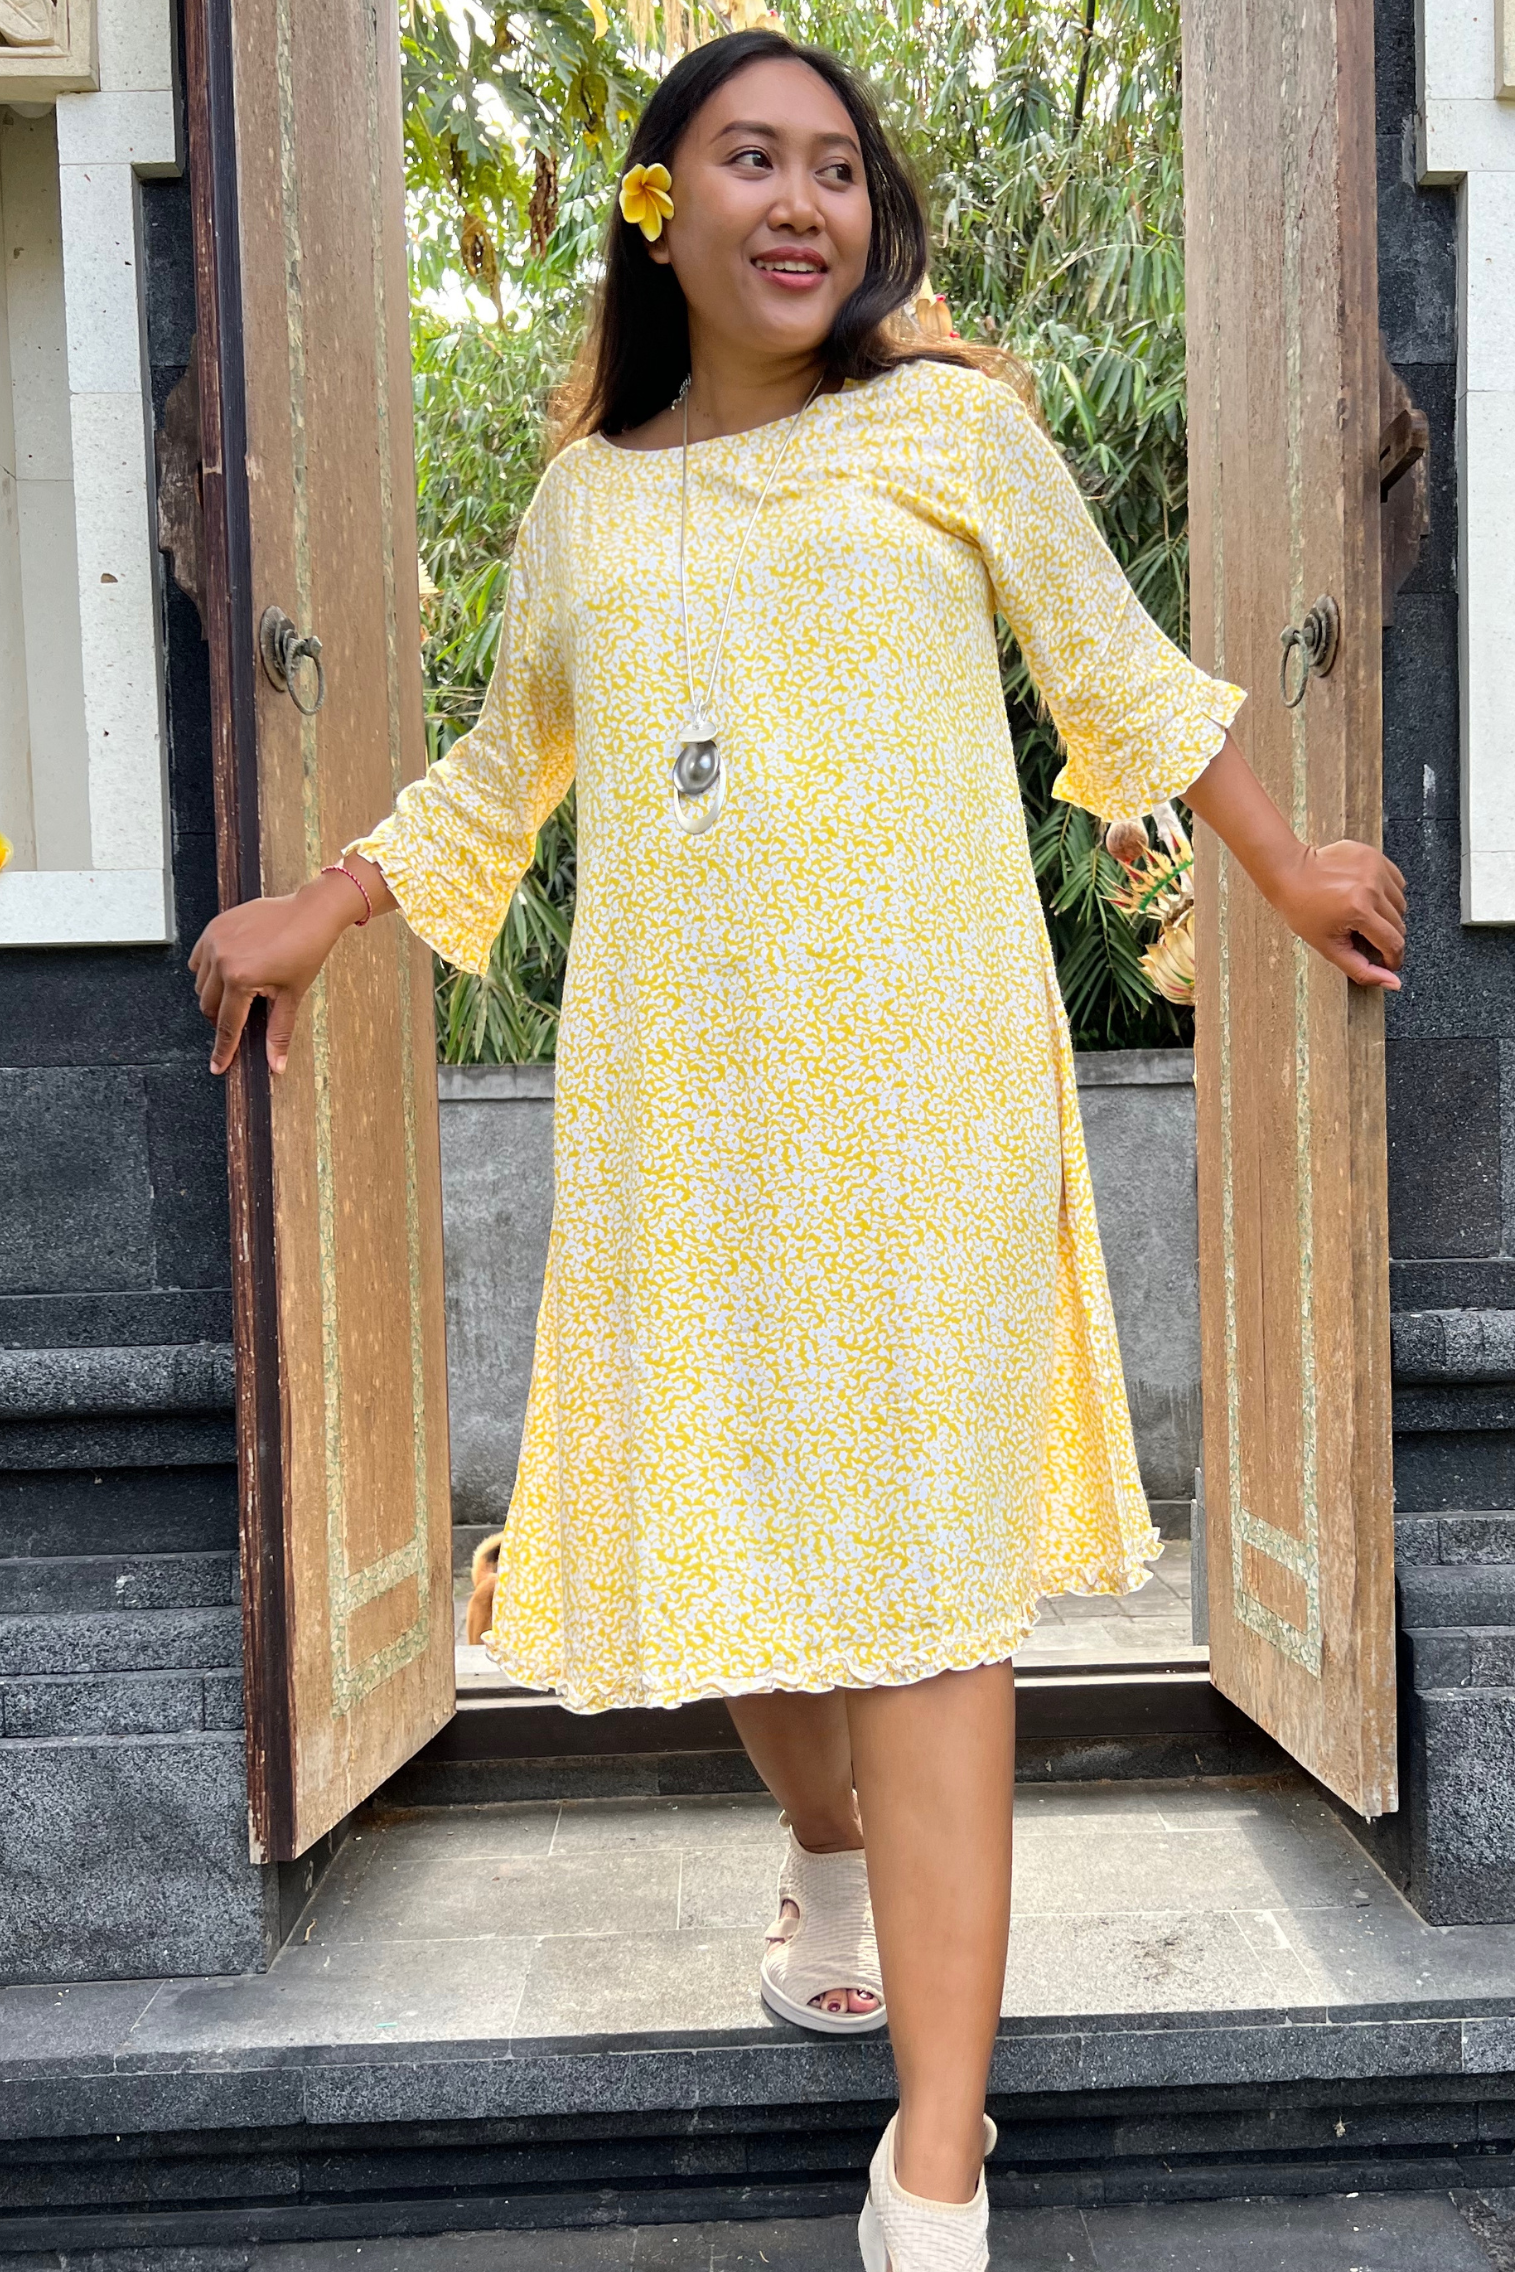 KitaKu model showing the latest rayon lemon printed dress with a mid length sleeve and round neckline